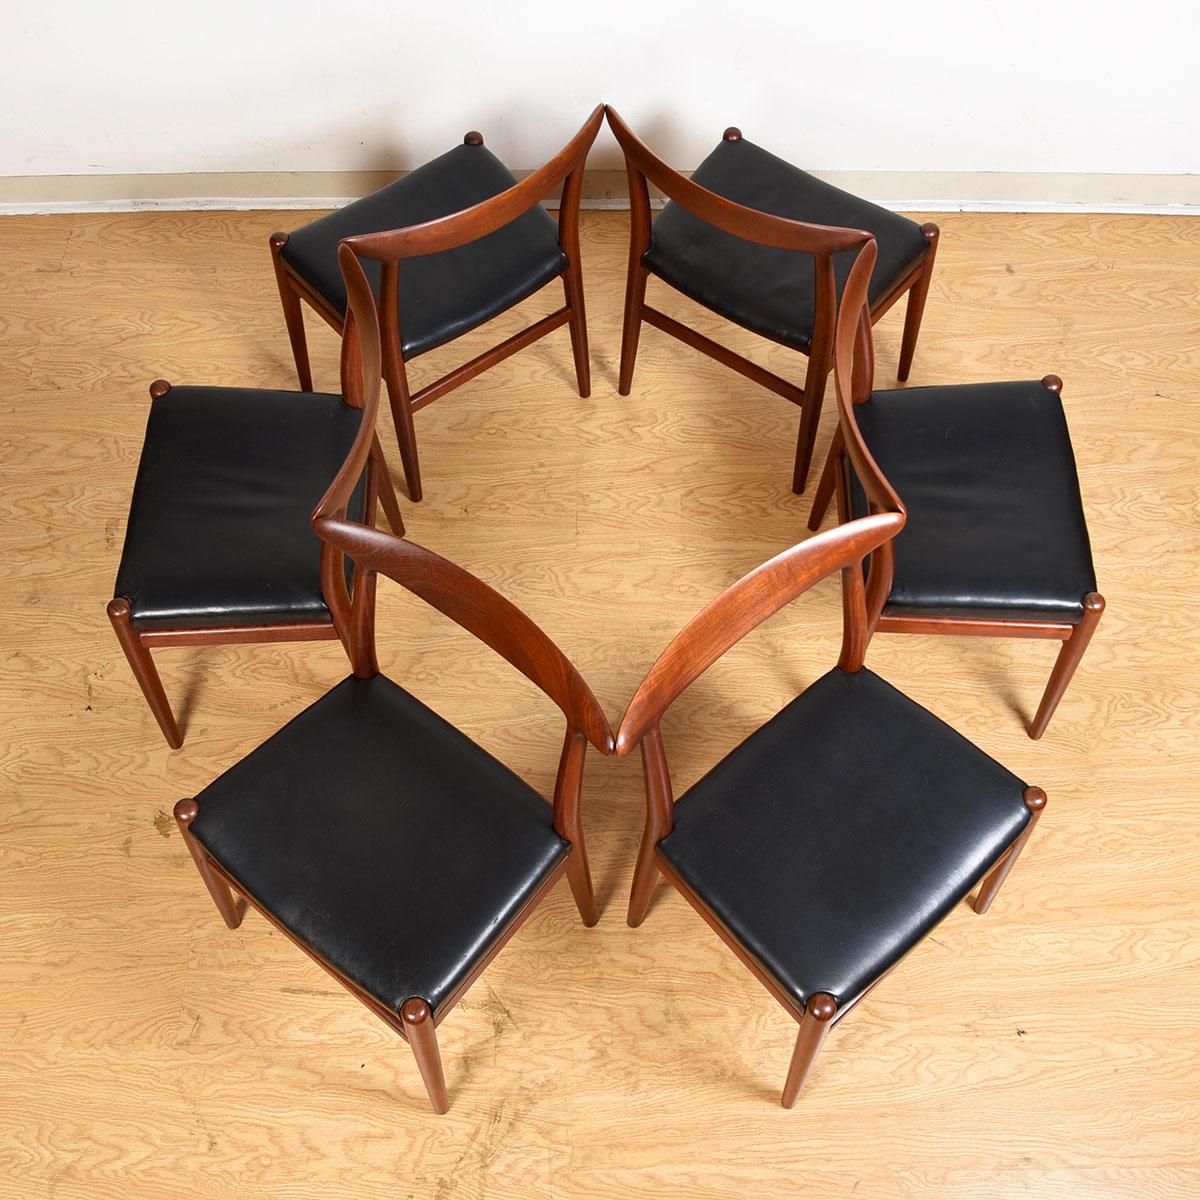 20th Century Set of 6 Danish Modern Teak with Leather W2 Dining Chairs by Hans Wegner For Sale